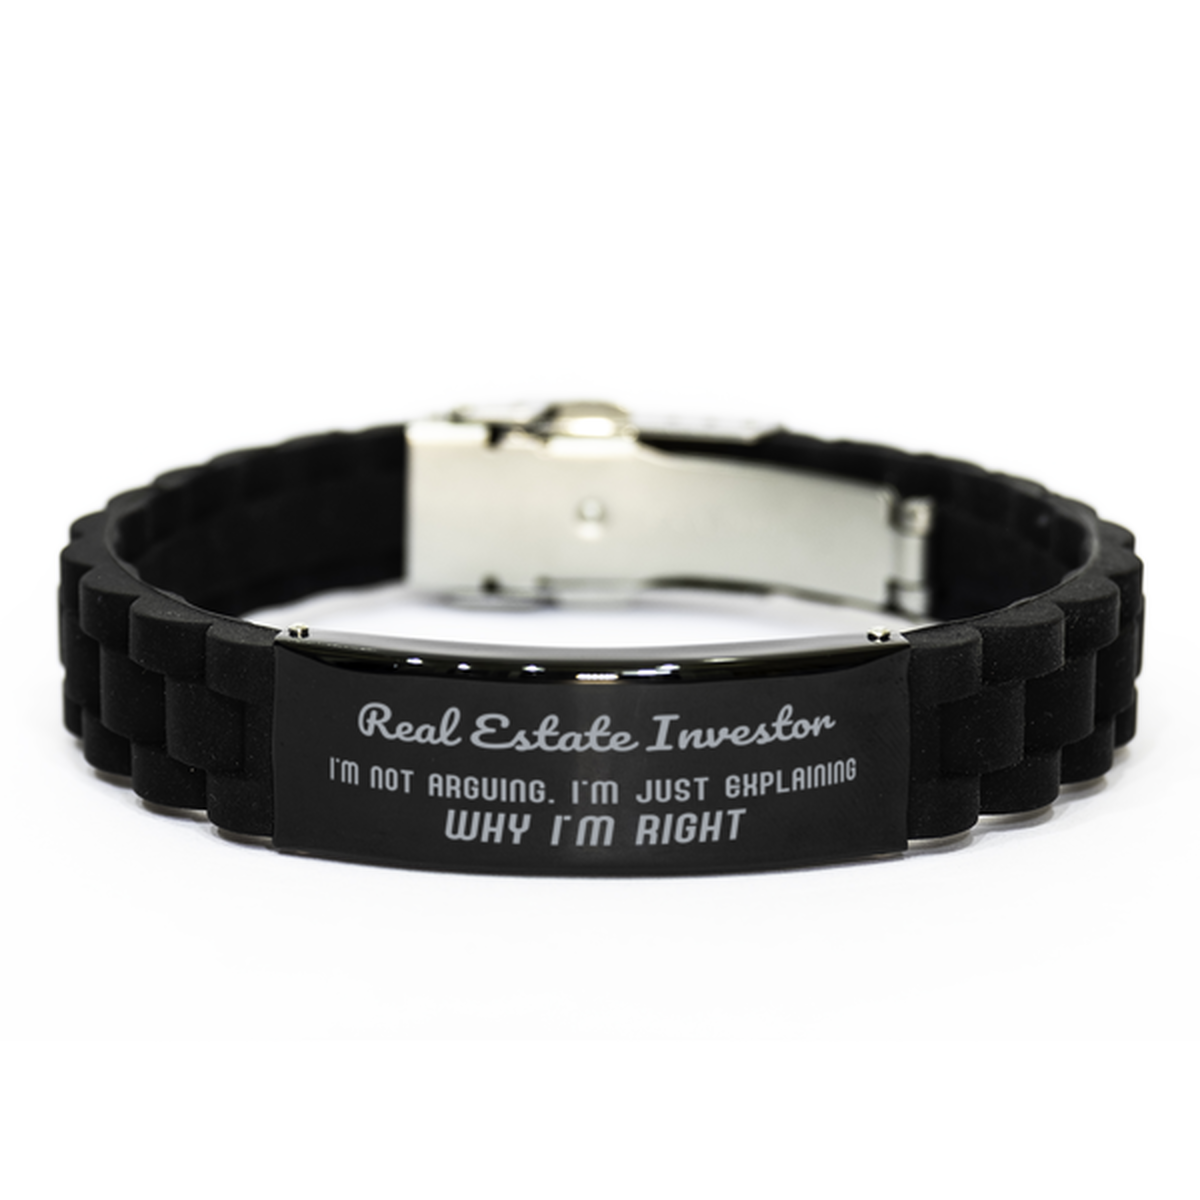 Real Estate Investor I'm not Arguing. I'm Just Explaining Why I'm RIGHT Black Glidelock Clasp Bracelet, Funny Saying Quote Real Estate Investor Gifts For Real Estate Investor Graduation Birthday Christmas Gifts for Men Women Coworker